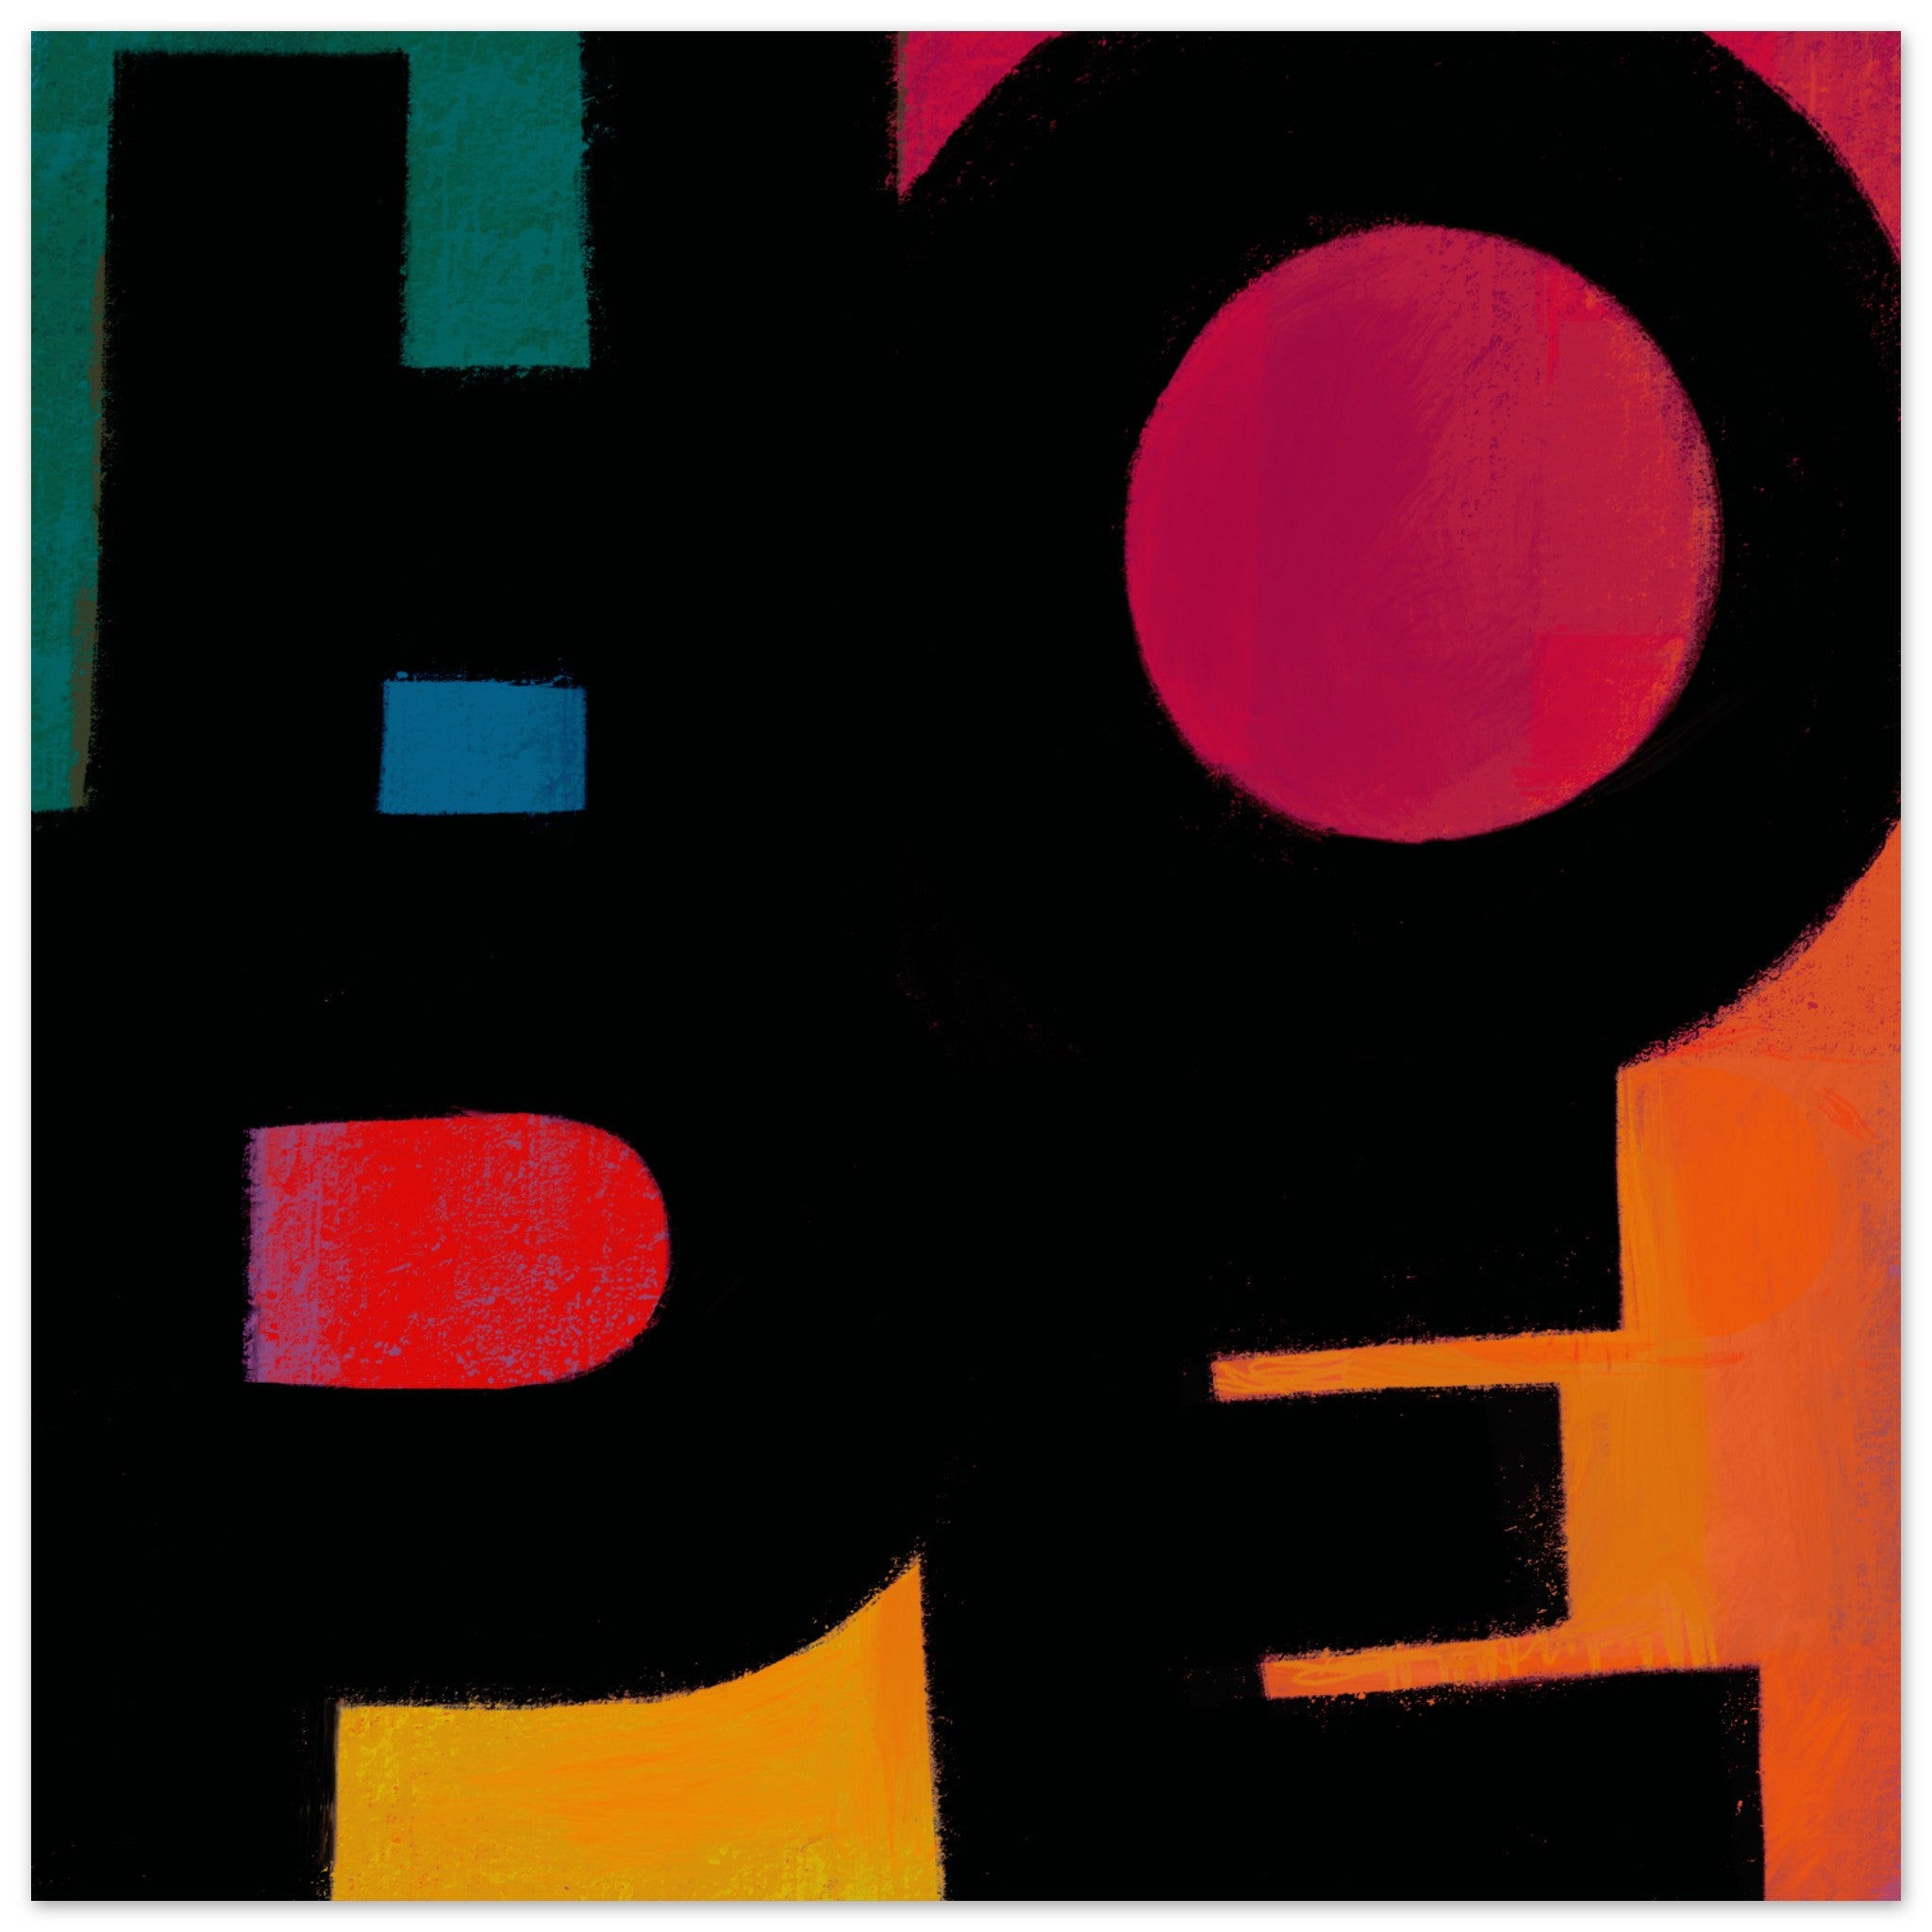 Hope Poster